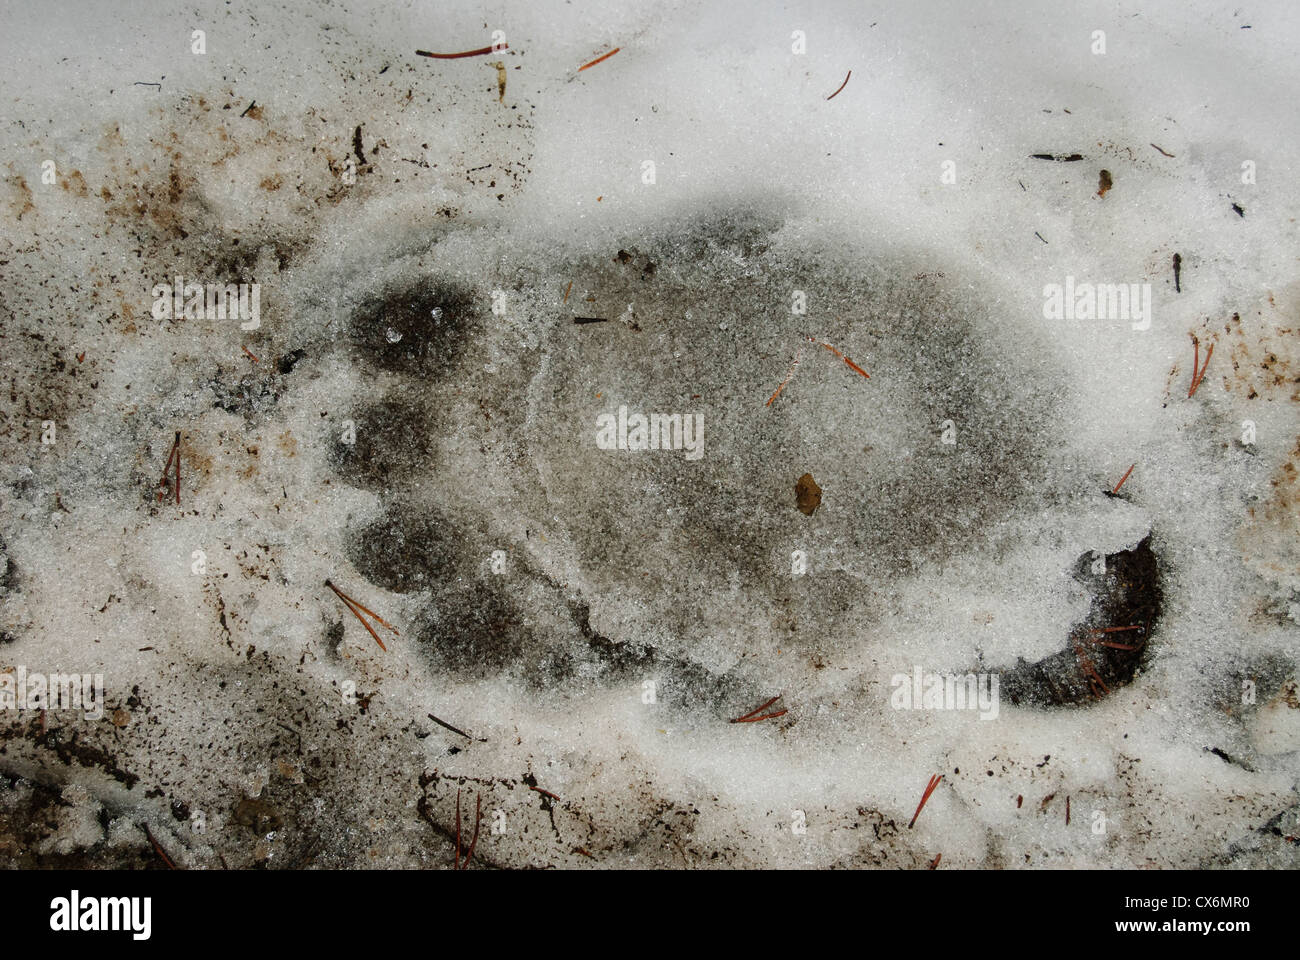 15 cm wide footprint of a wild brown bear in the snow Stock Photo